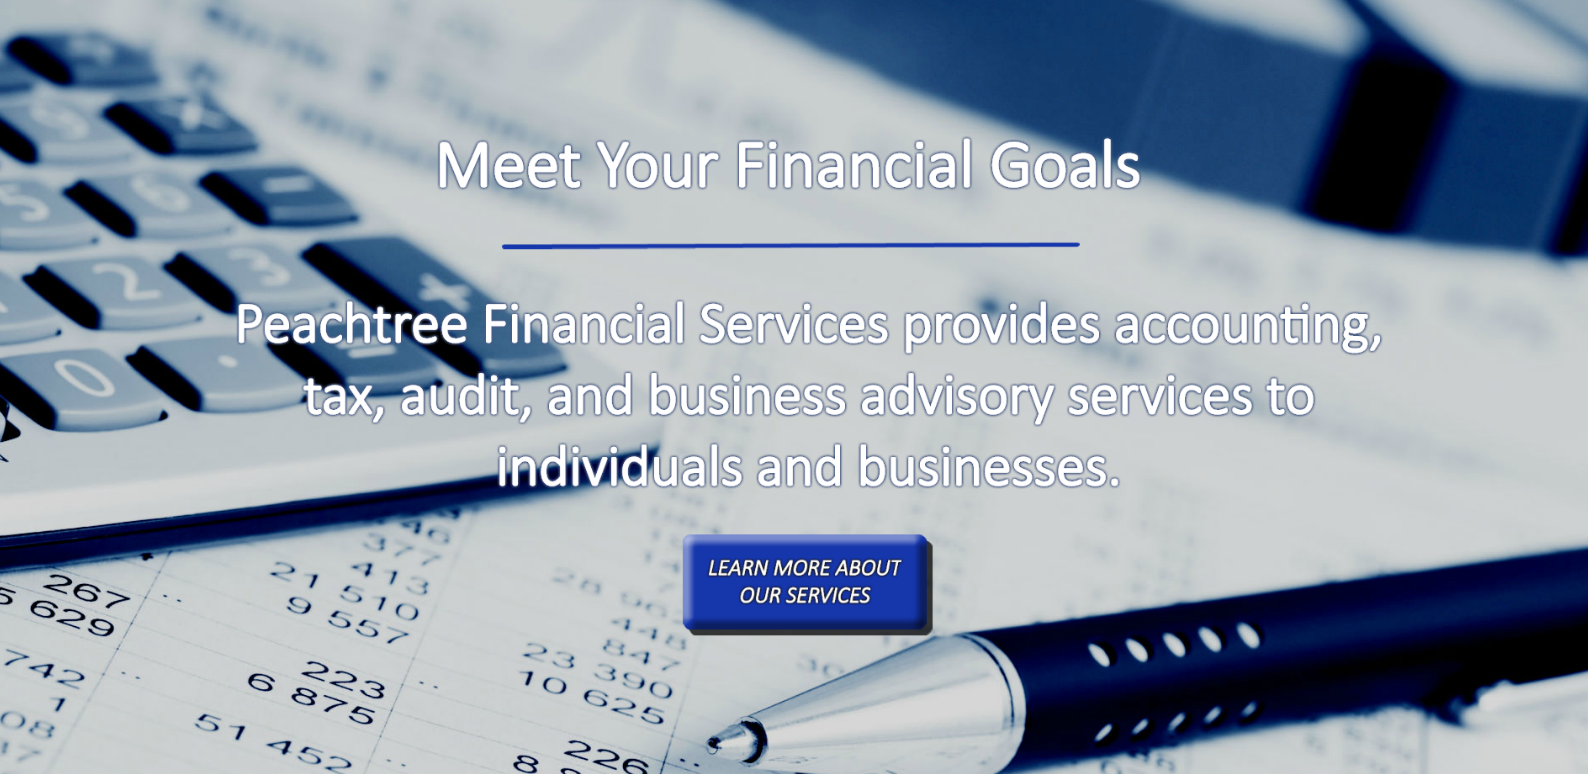 Peachtree Financial Services